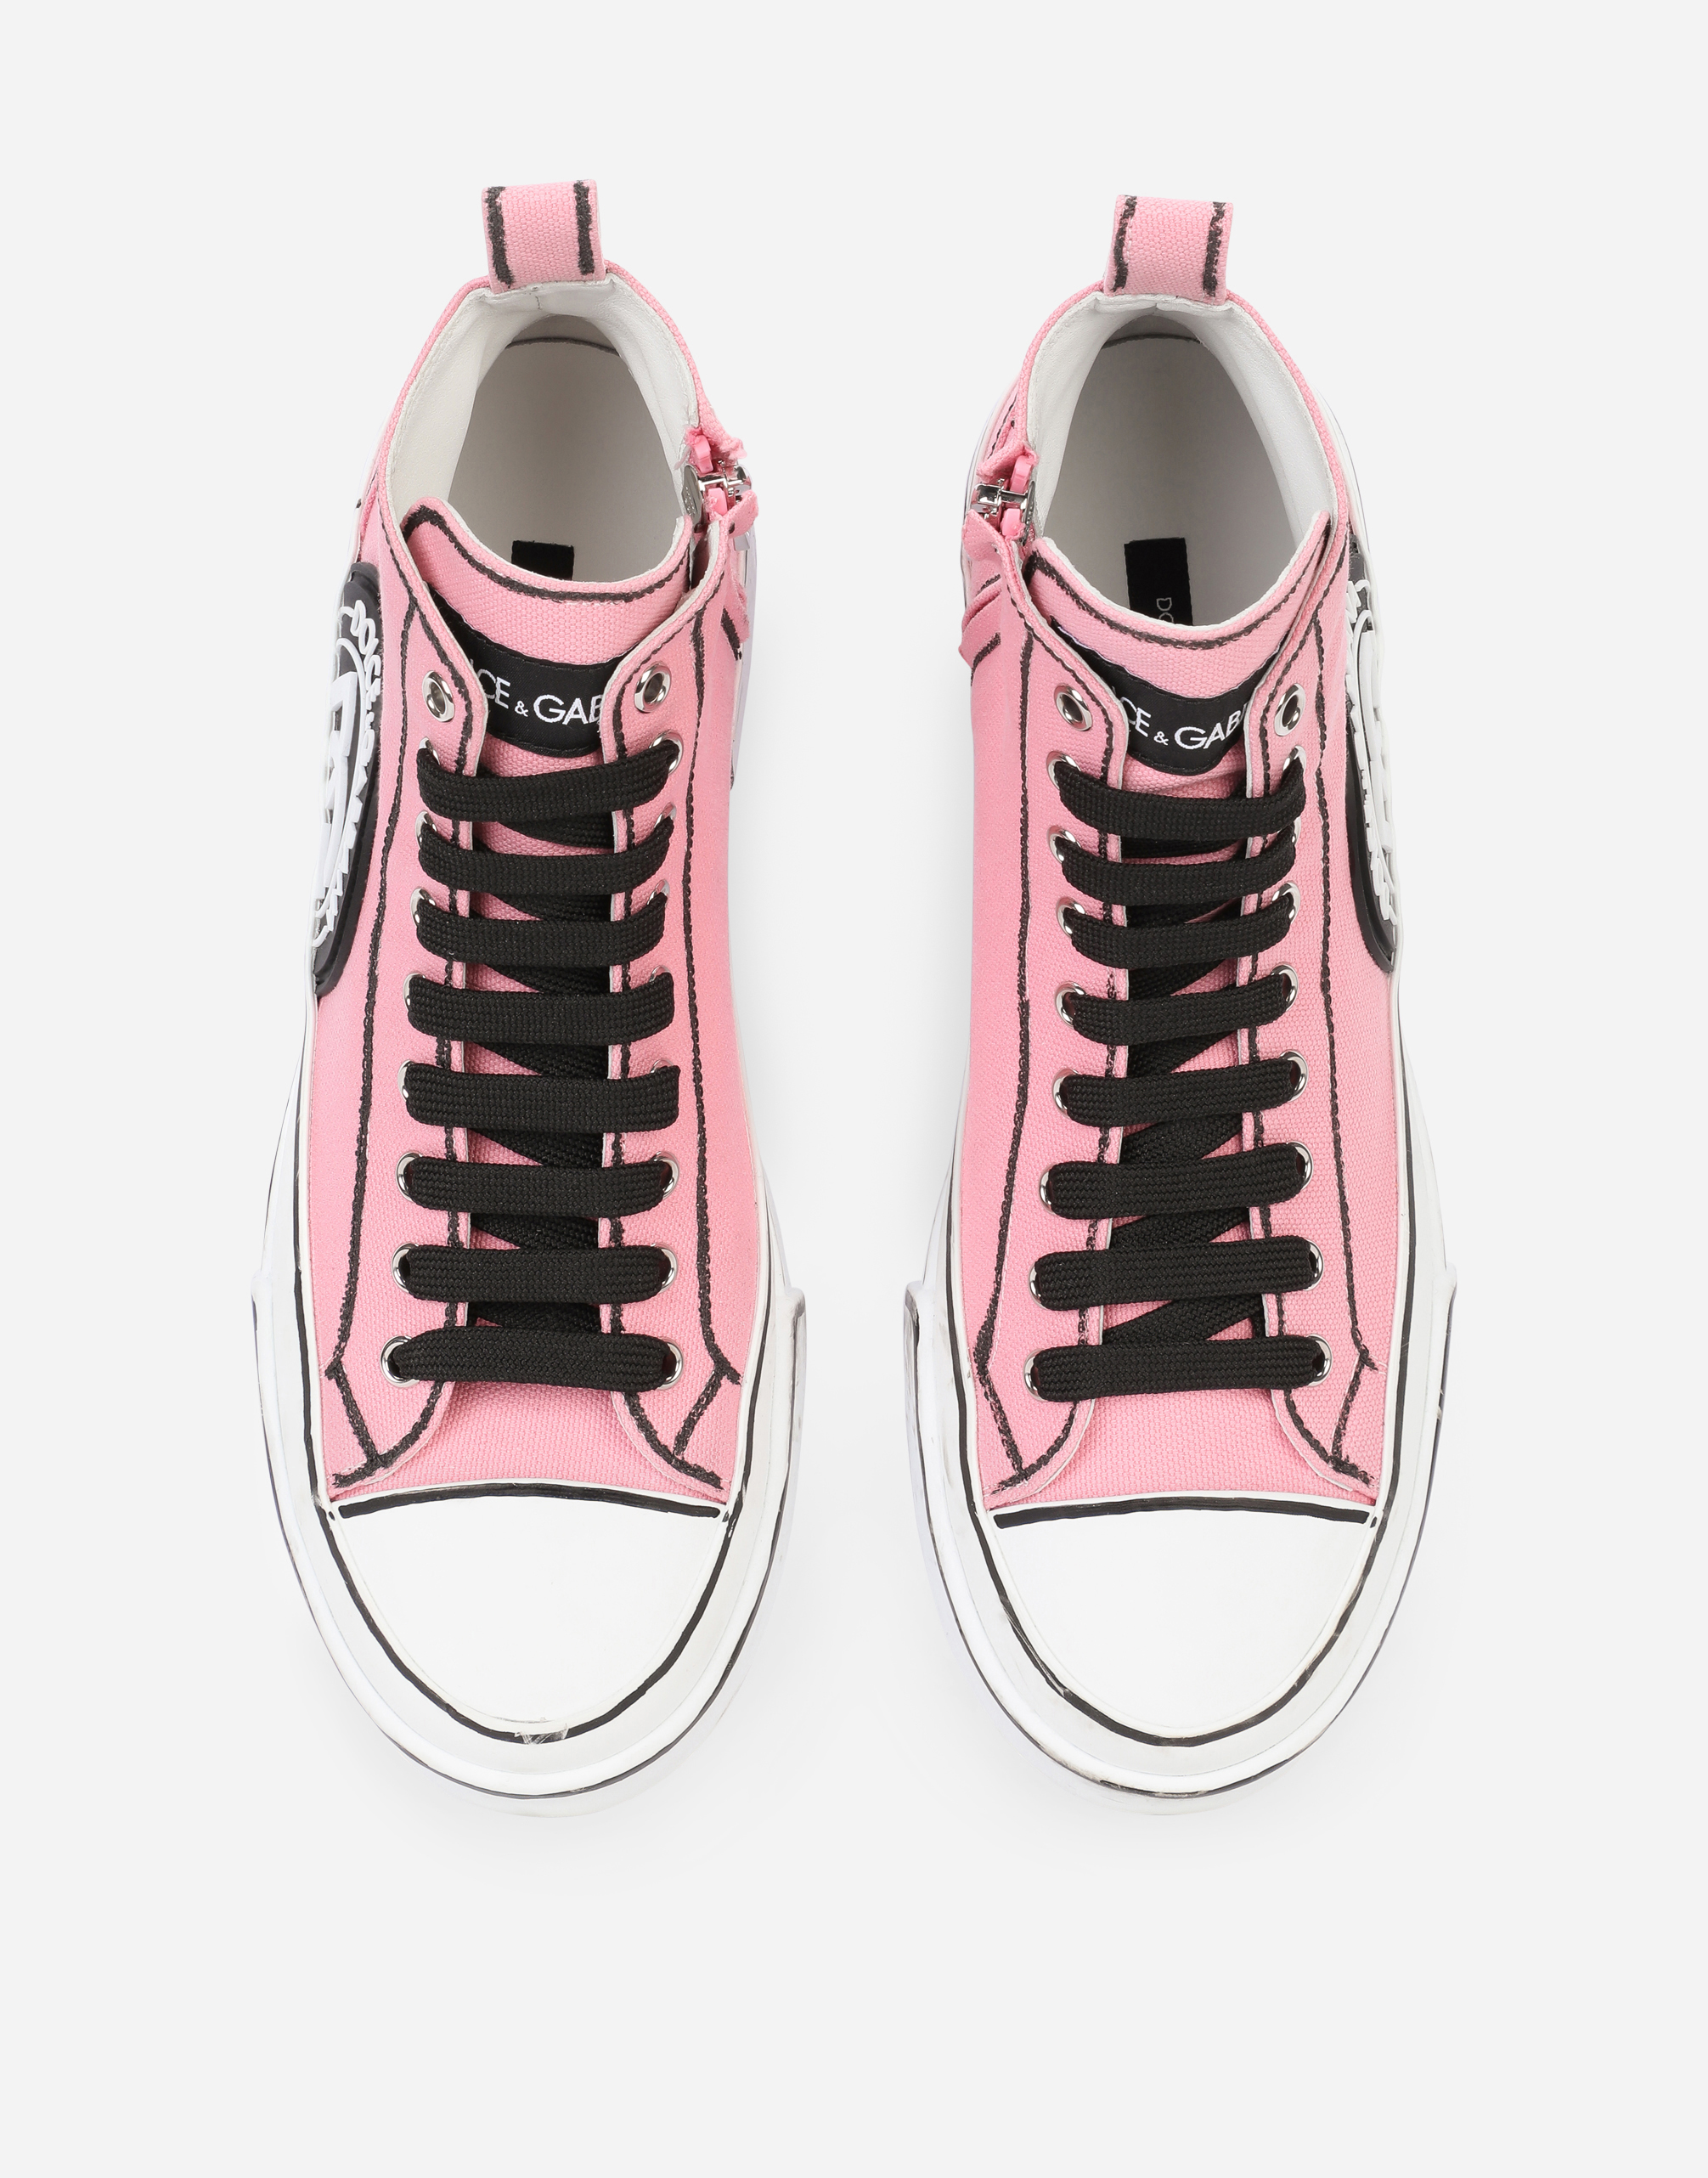 Hand-painted canvas Portofino Light mid-top sneakers